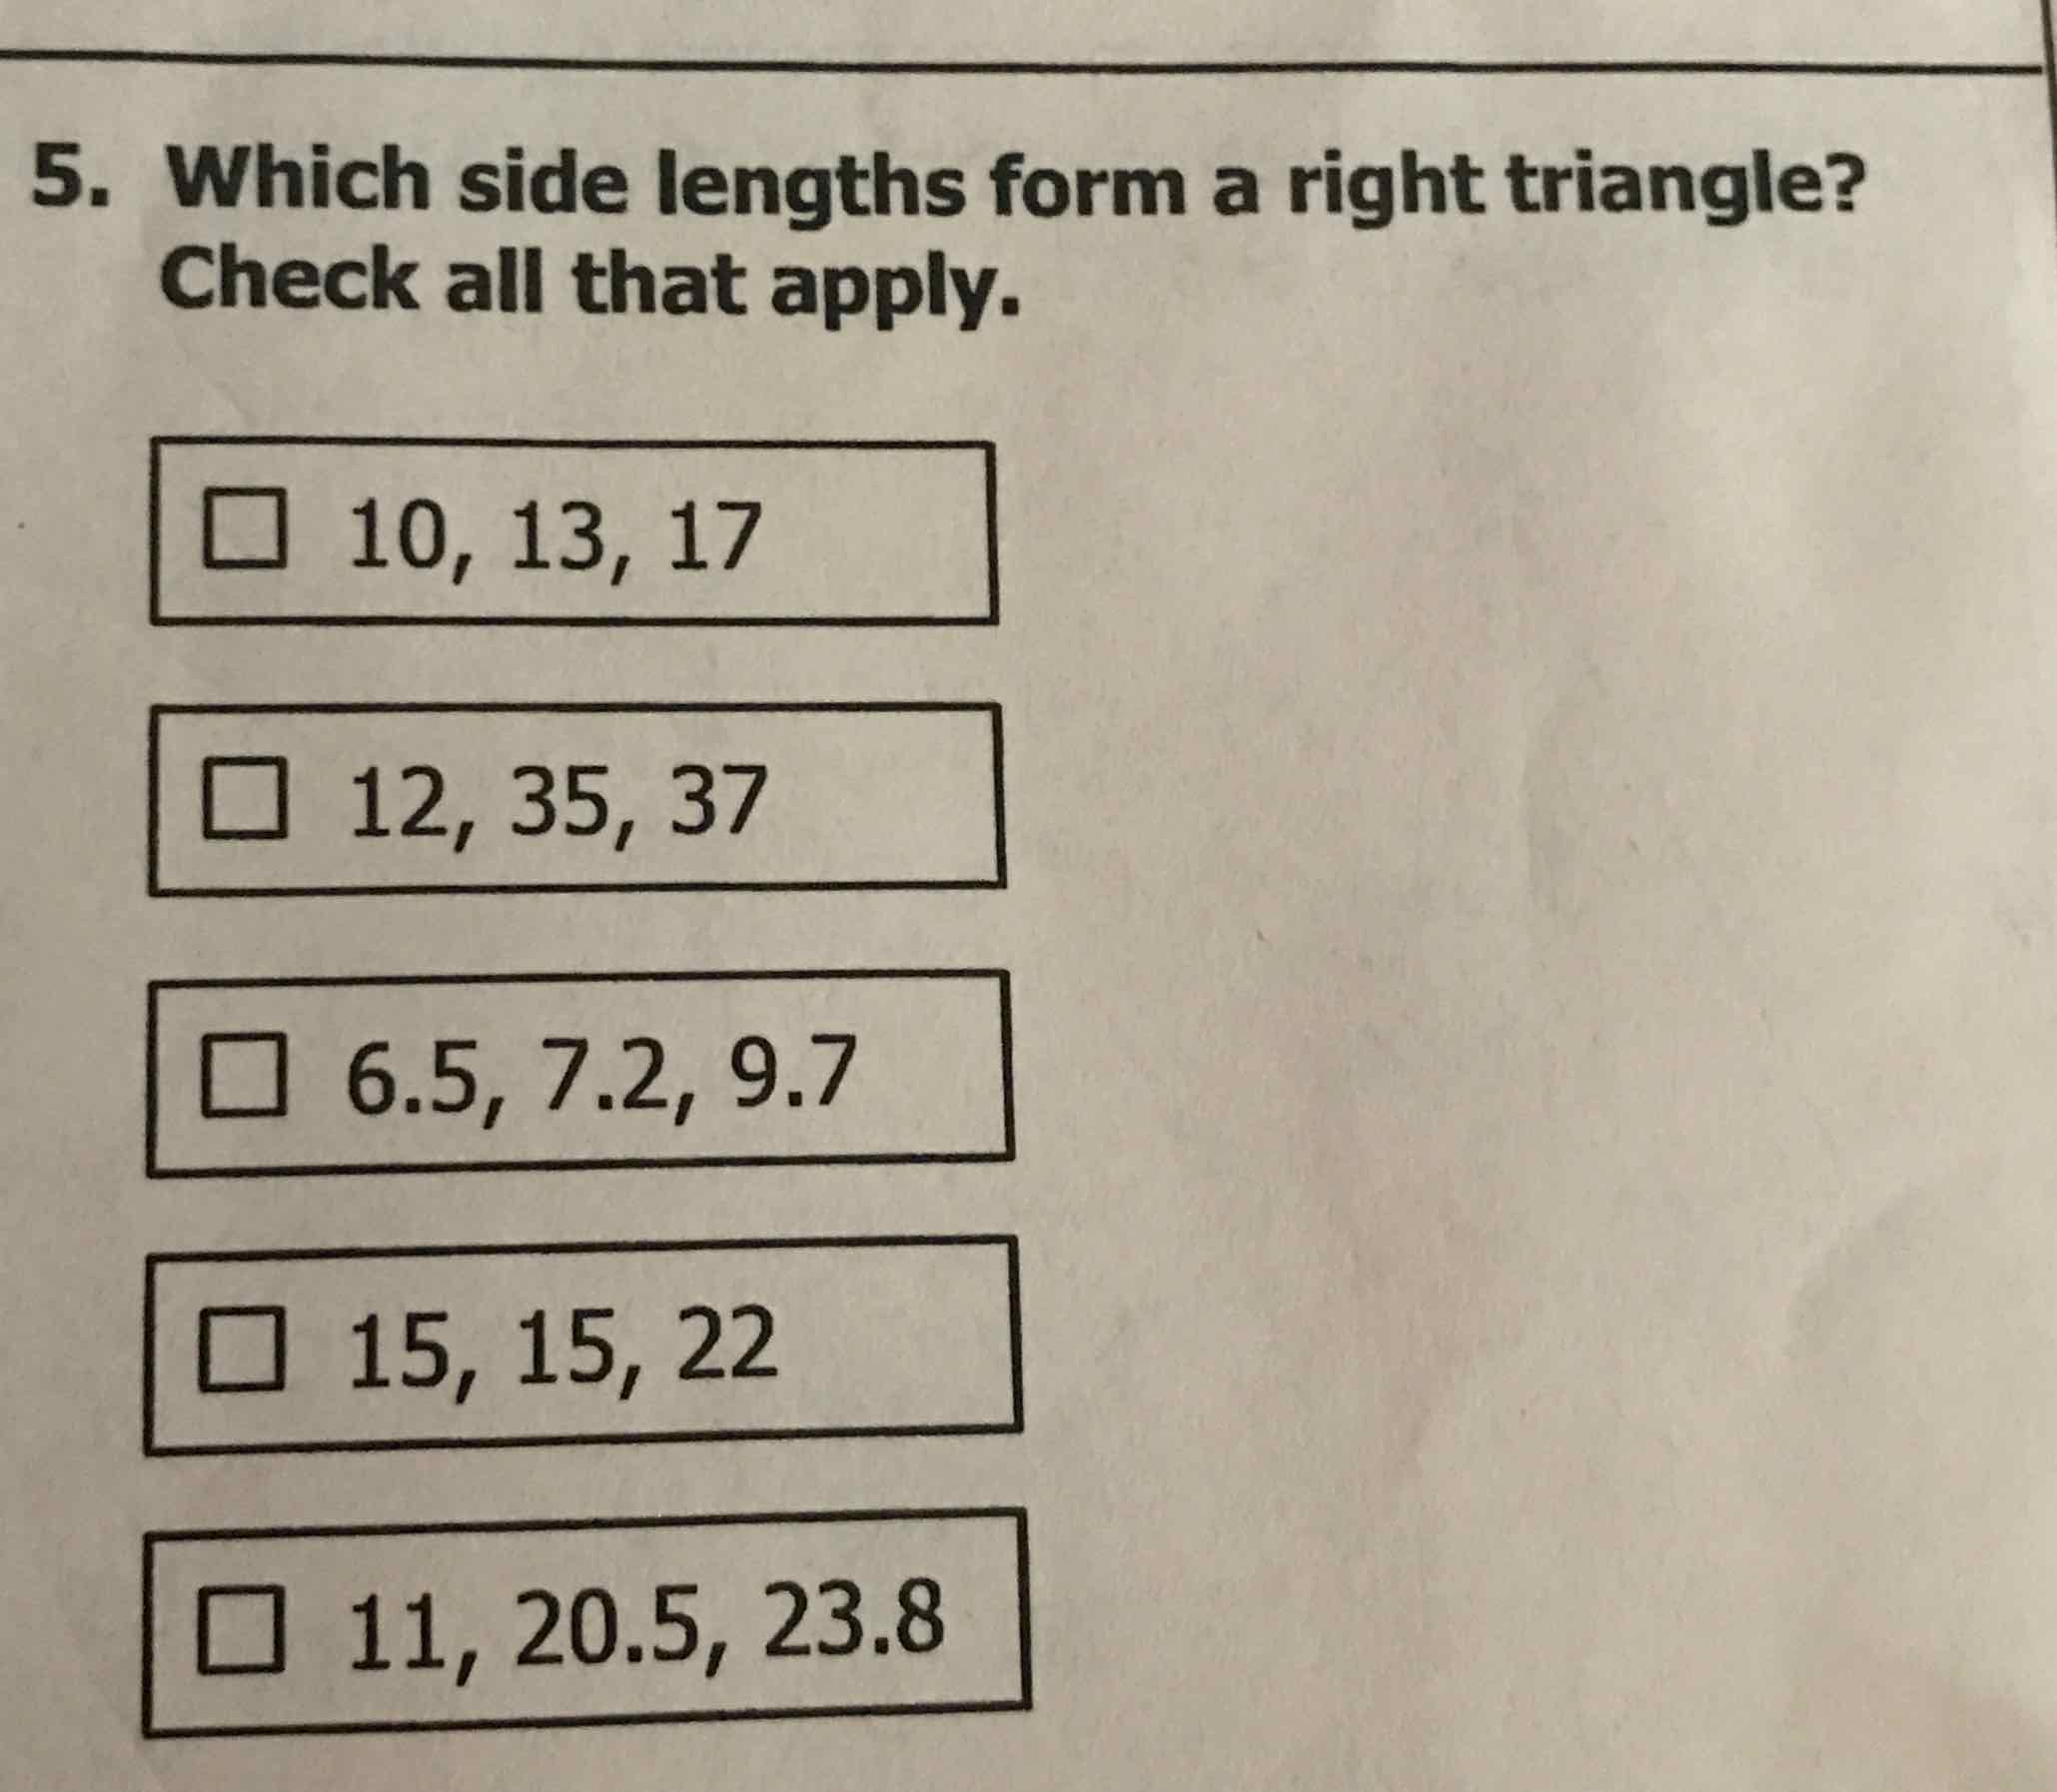 5. Which side lengths form a right triangle? Check all that apply.
\( 10,13,17 \)
\( 12,35,37 \)
\( 6.5,7.2,9.7 \)
\( 15,15,22 \)
\( 11,20.5,23.8 \)